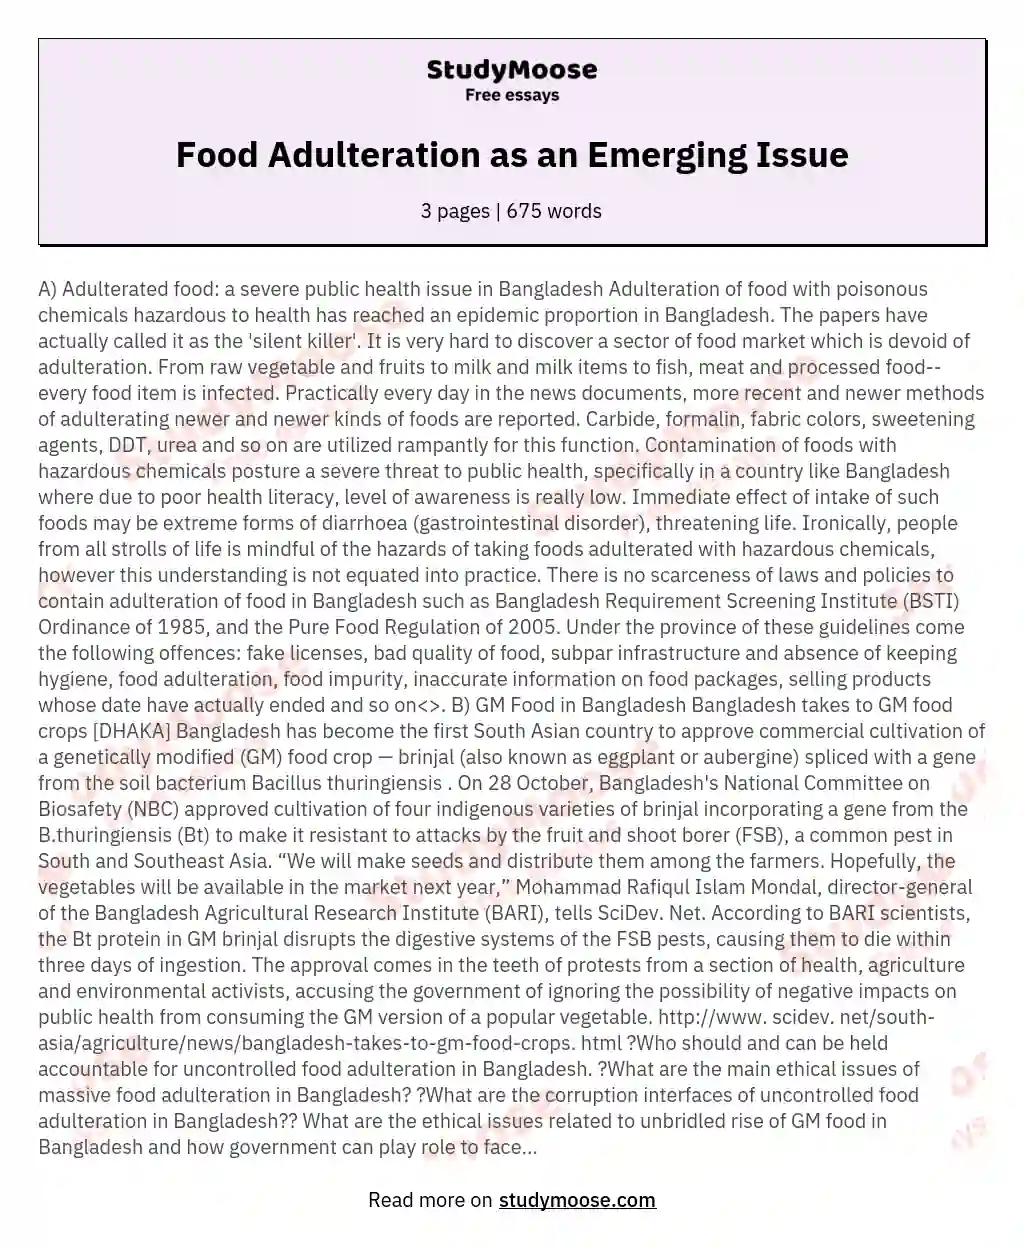 Food Adulteration as an Emerging Issue essay